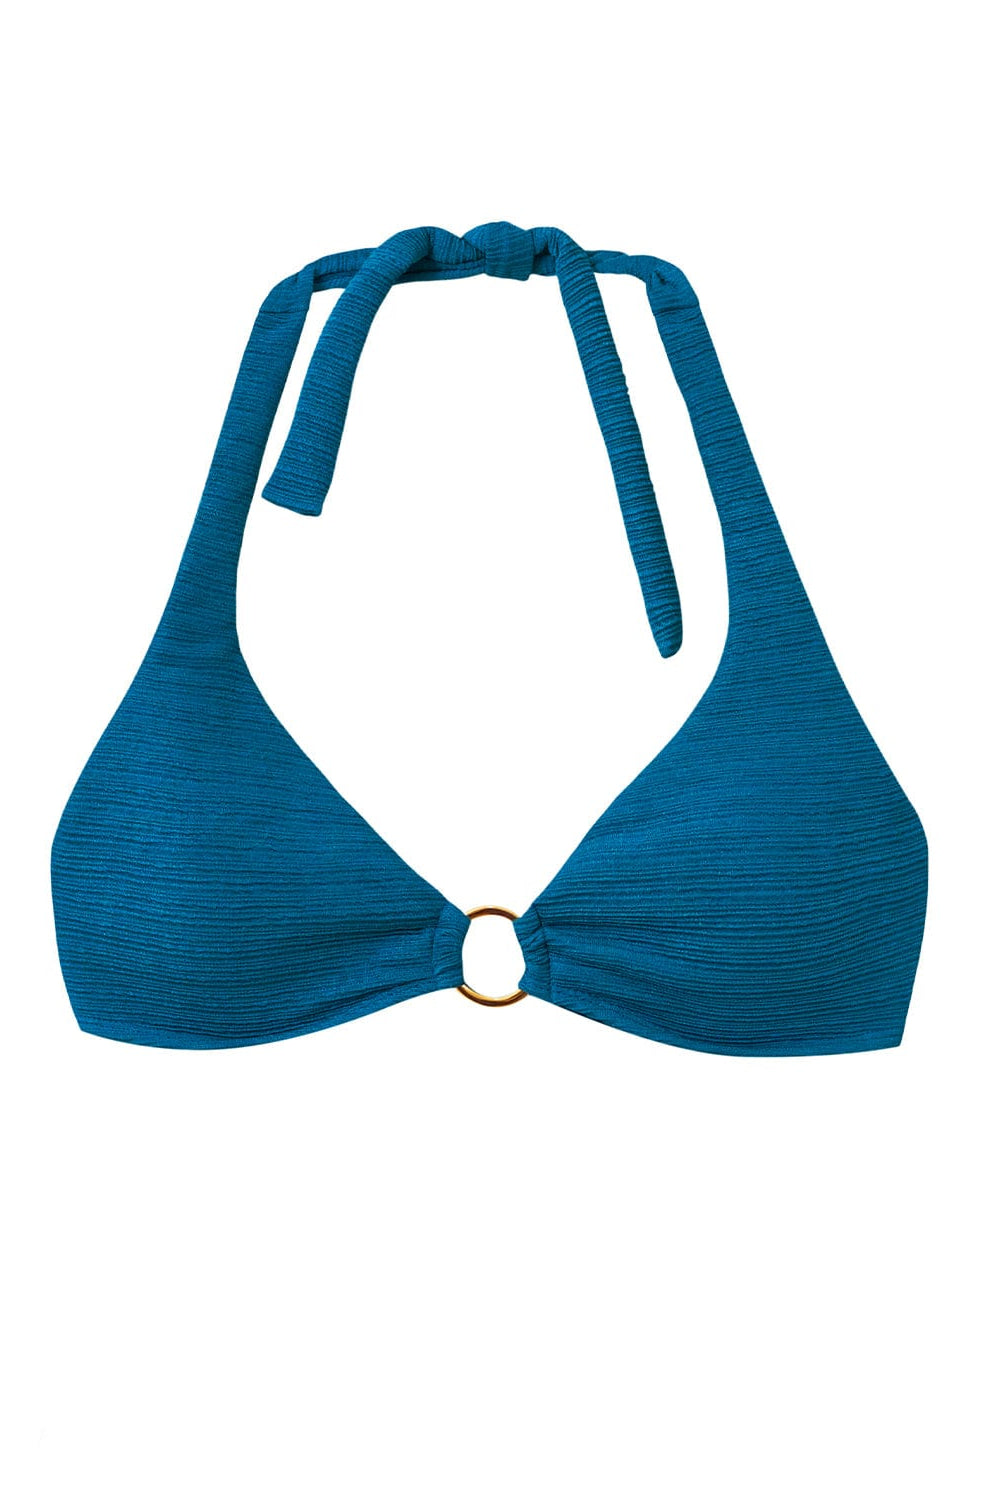 A textured turquoise halter bikini top with gold details. Featured against a white wall background.